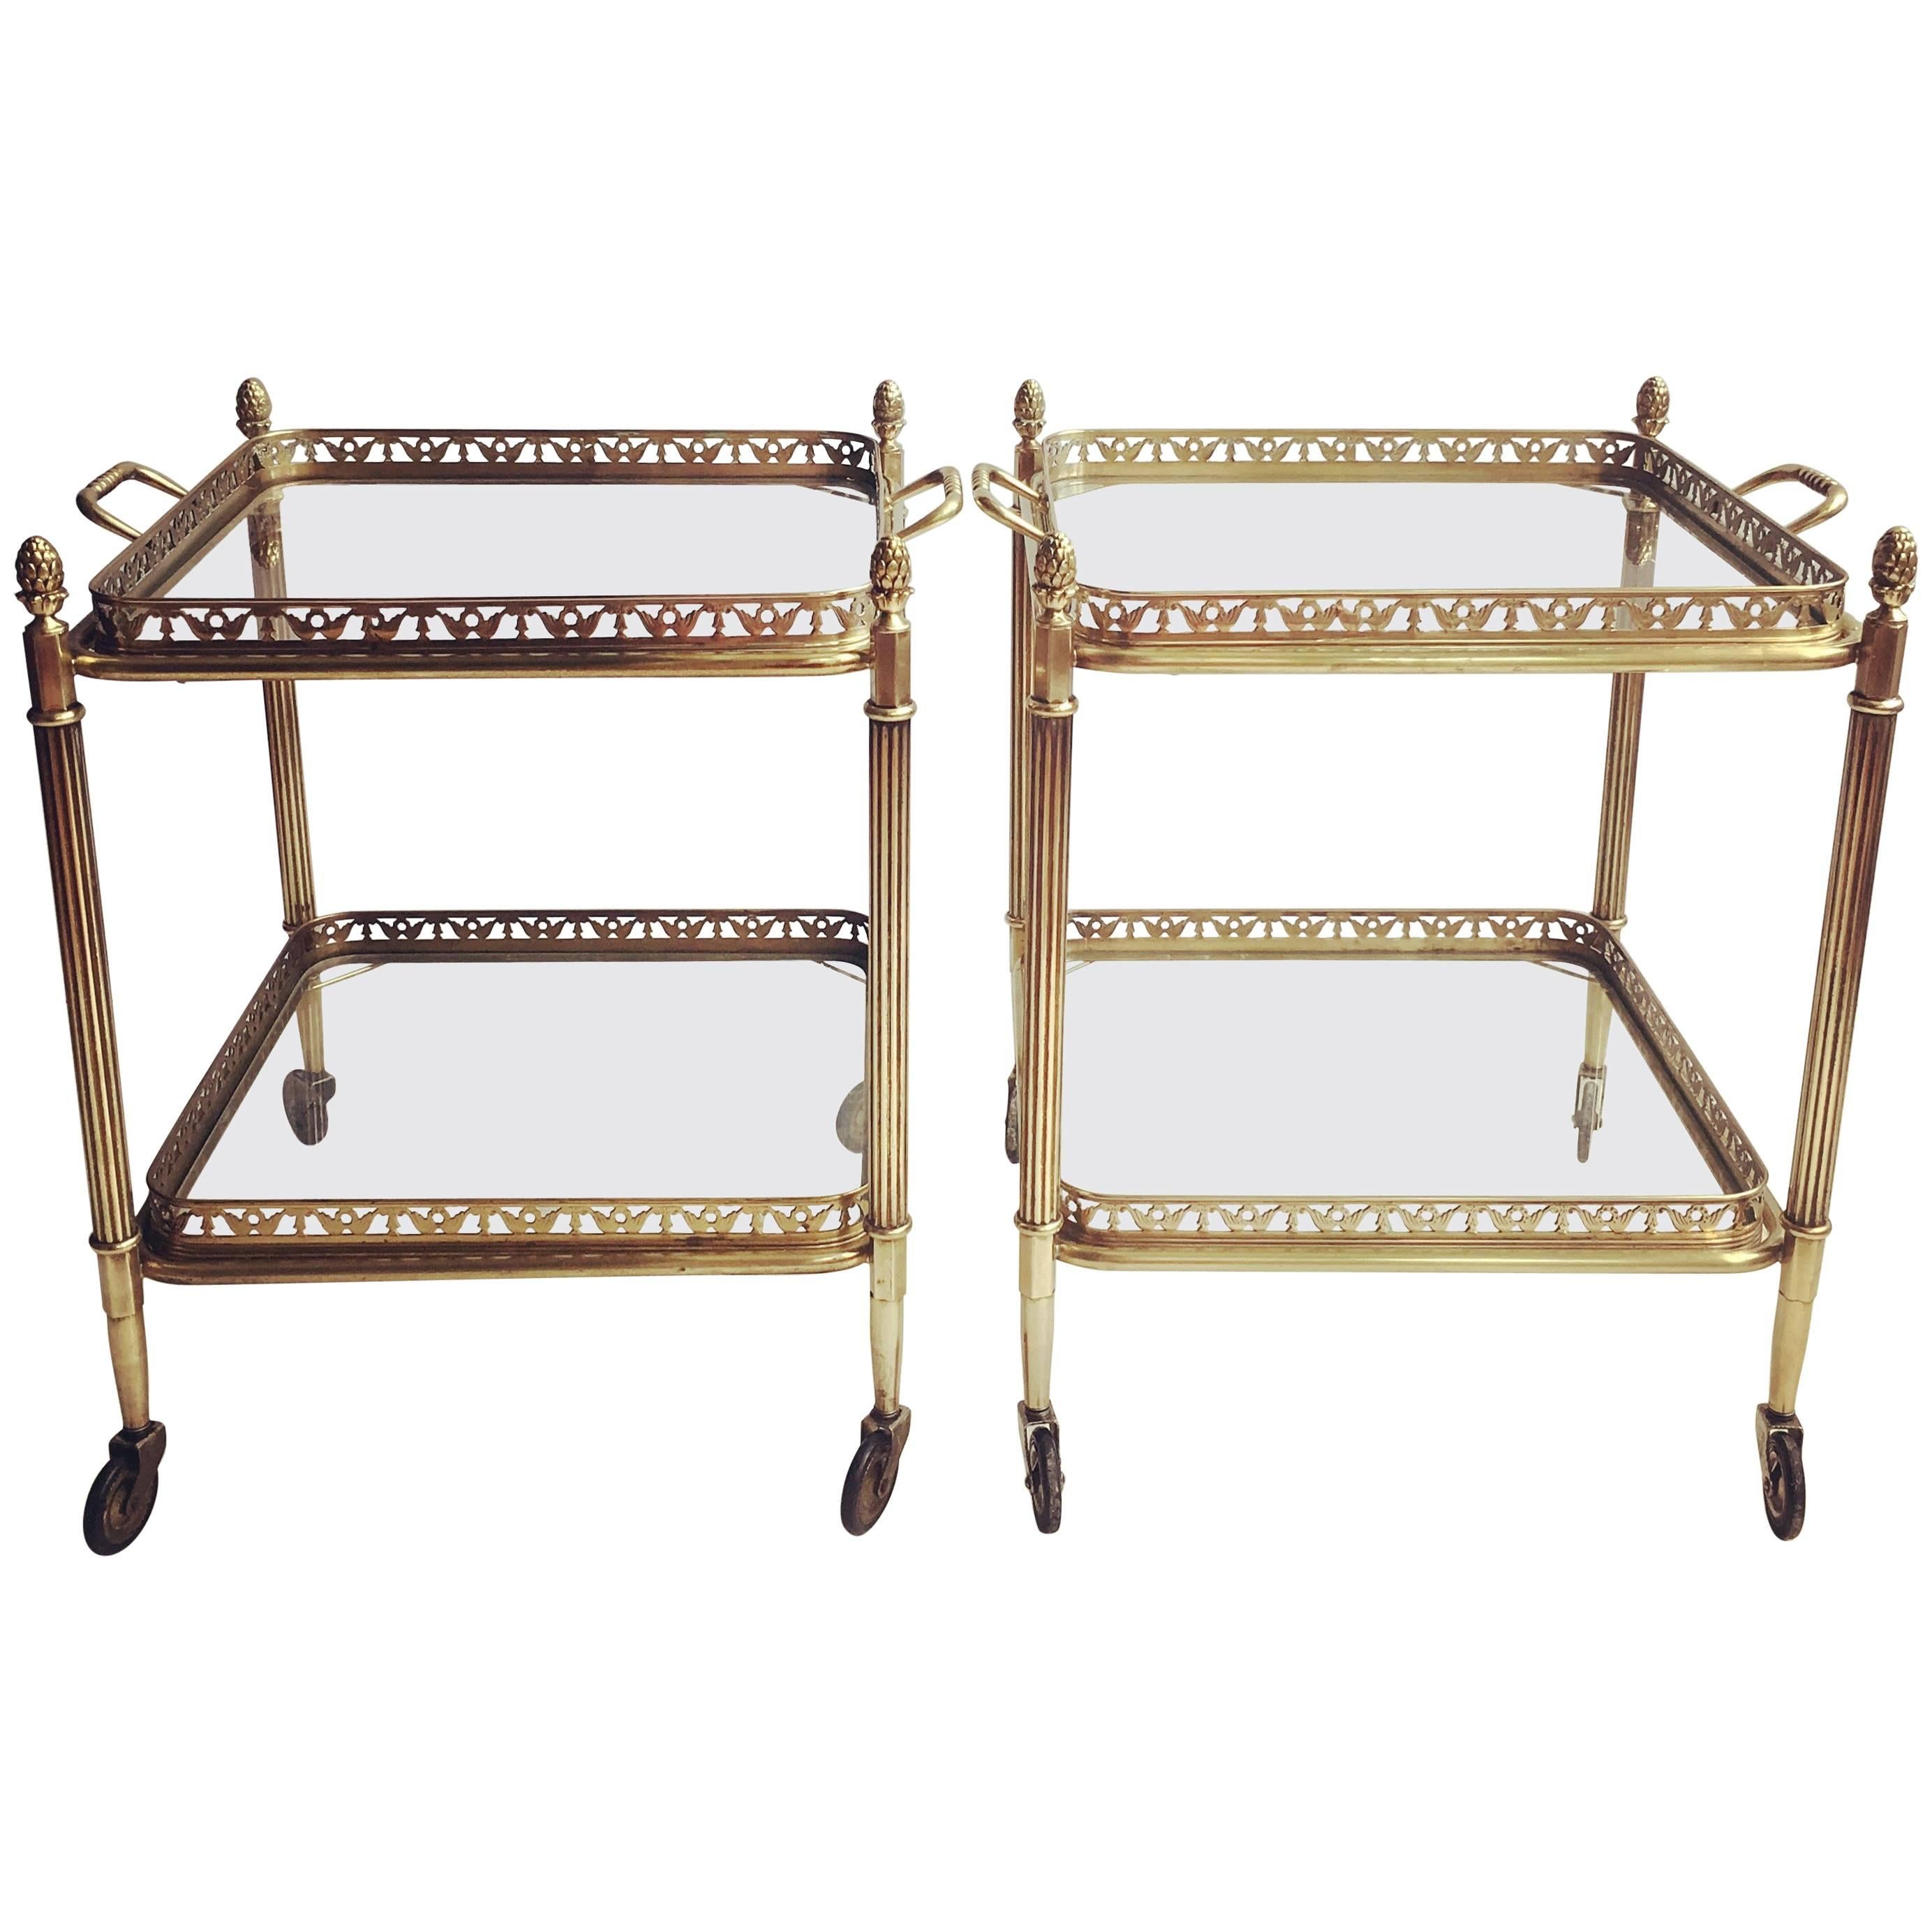 Pair of Vintage French Brass Side Tables or Trolleys Bar Carts